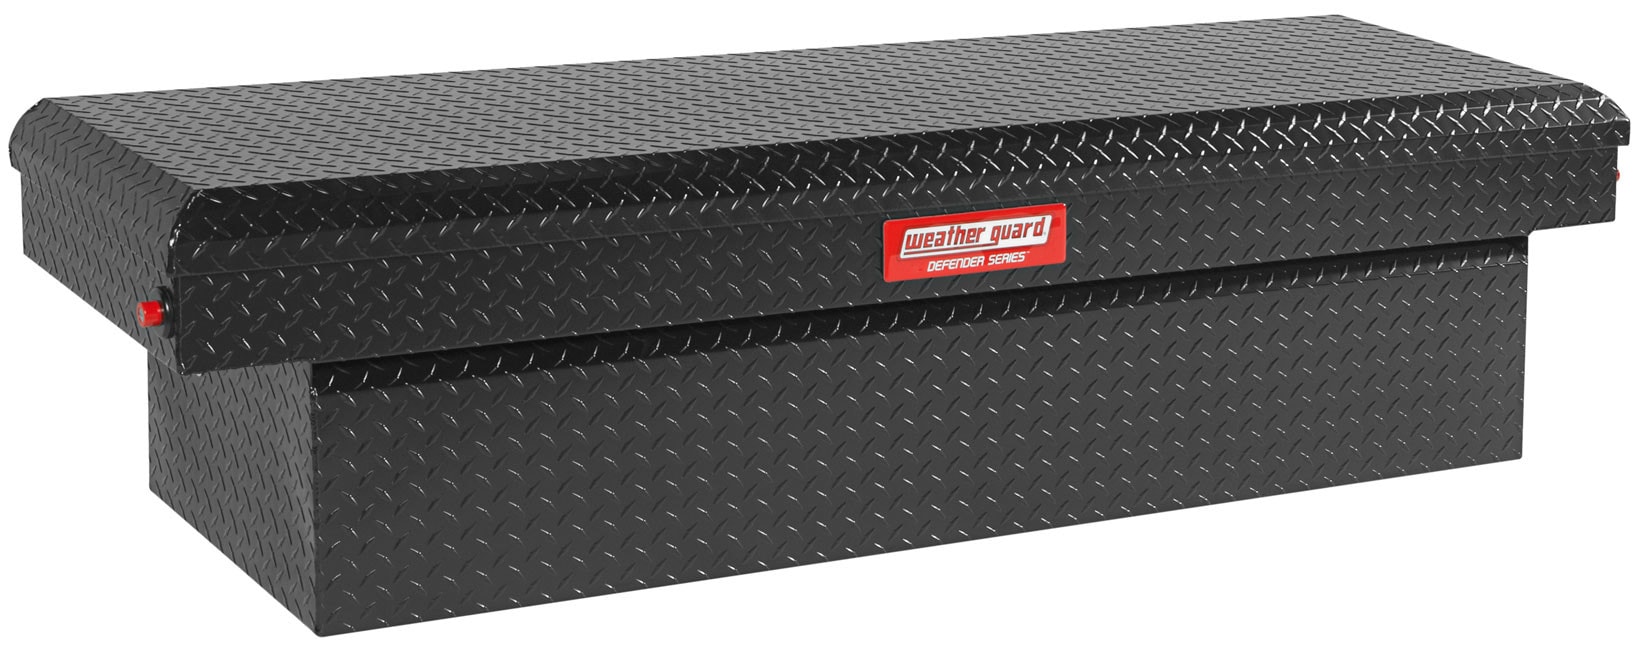 71.38-in x 19.63-in x 17.69-in Black Aluminum Crossover Truck Tool Box | - WEATHER GUARD 302105-53-01